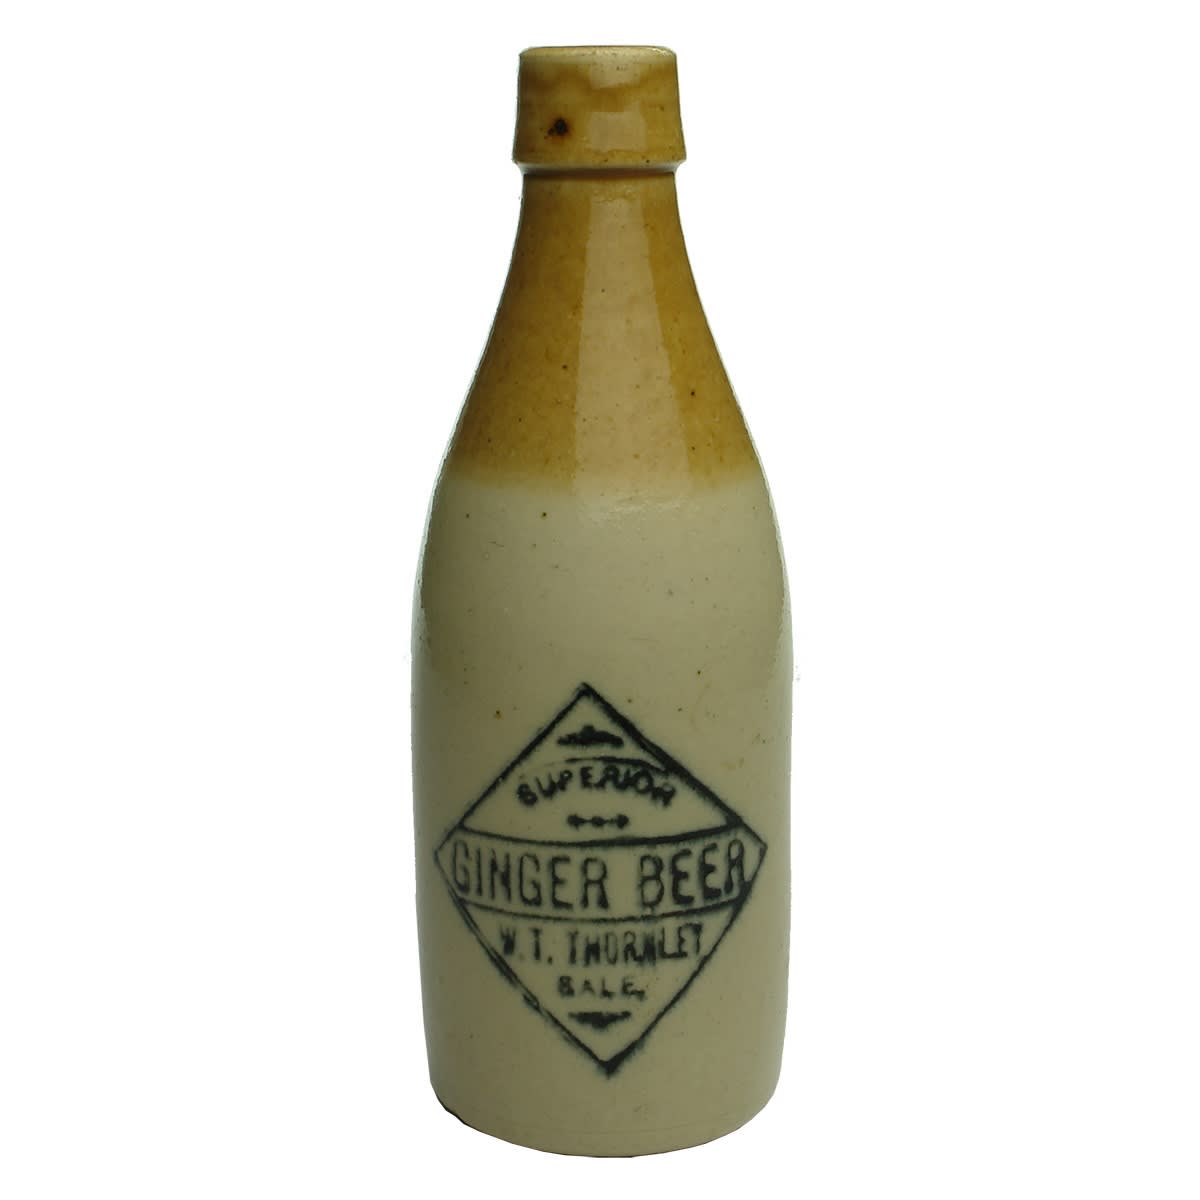 Ginger Beer. W. T. Thornley, Sale. Champagne. Tan Top. (Victoria)